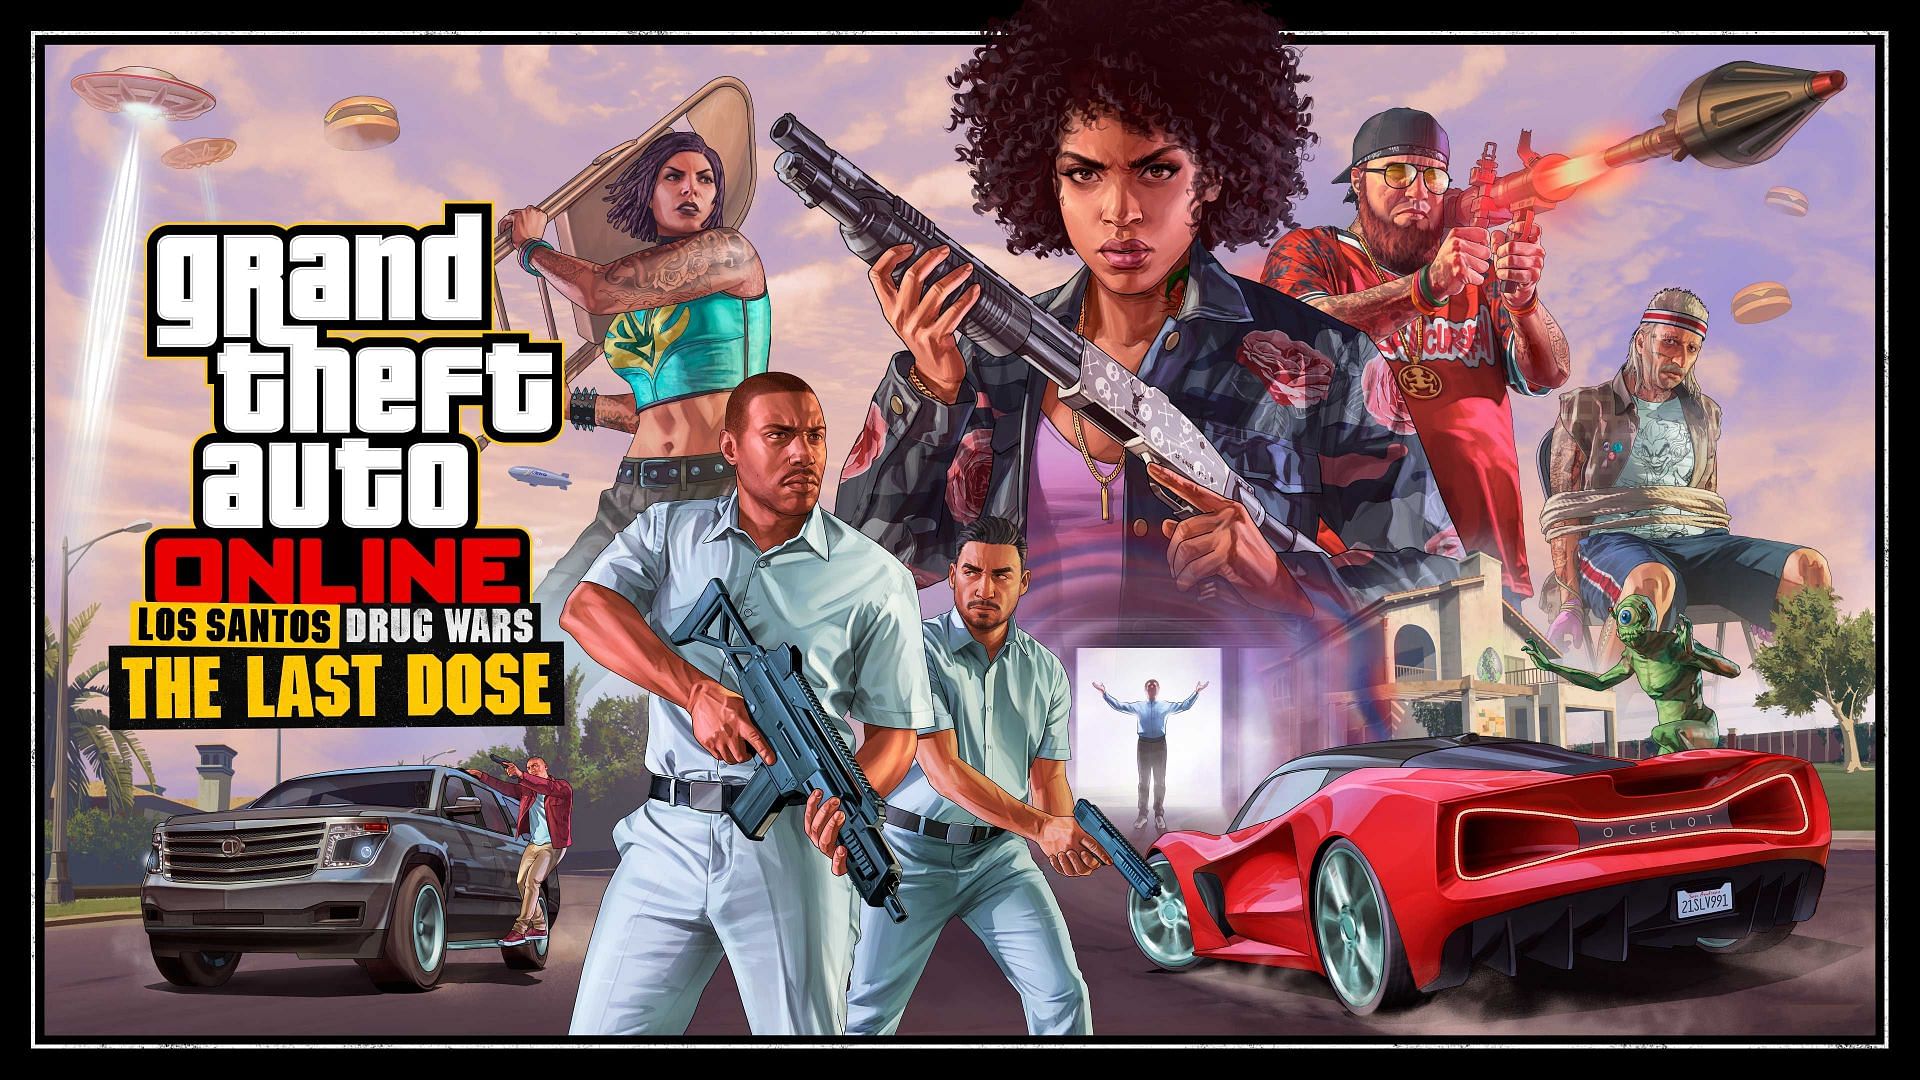 Official cover art for The Last Dose update (Image via Rockstar Games)